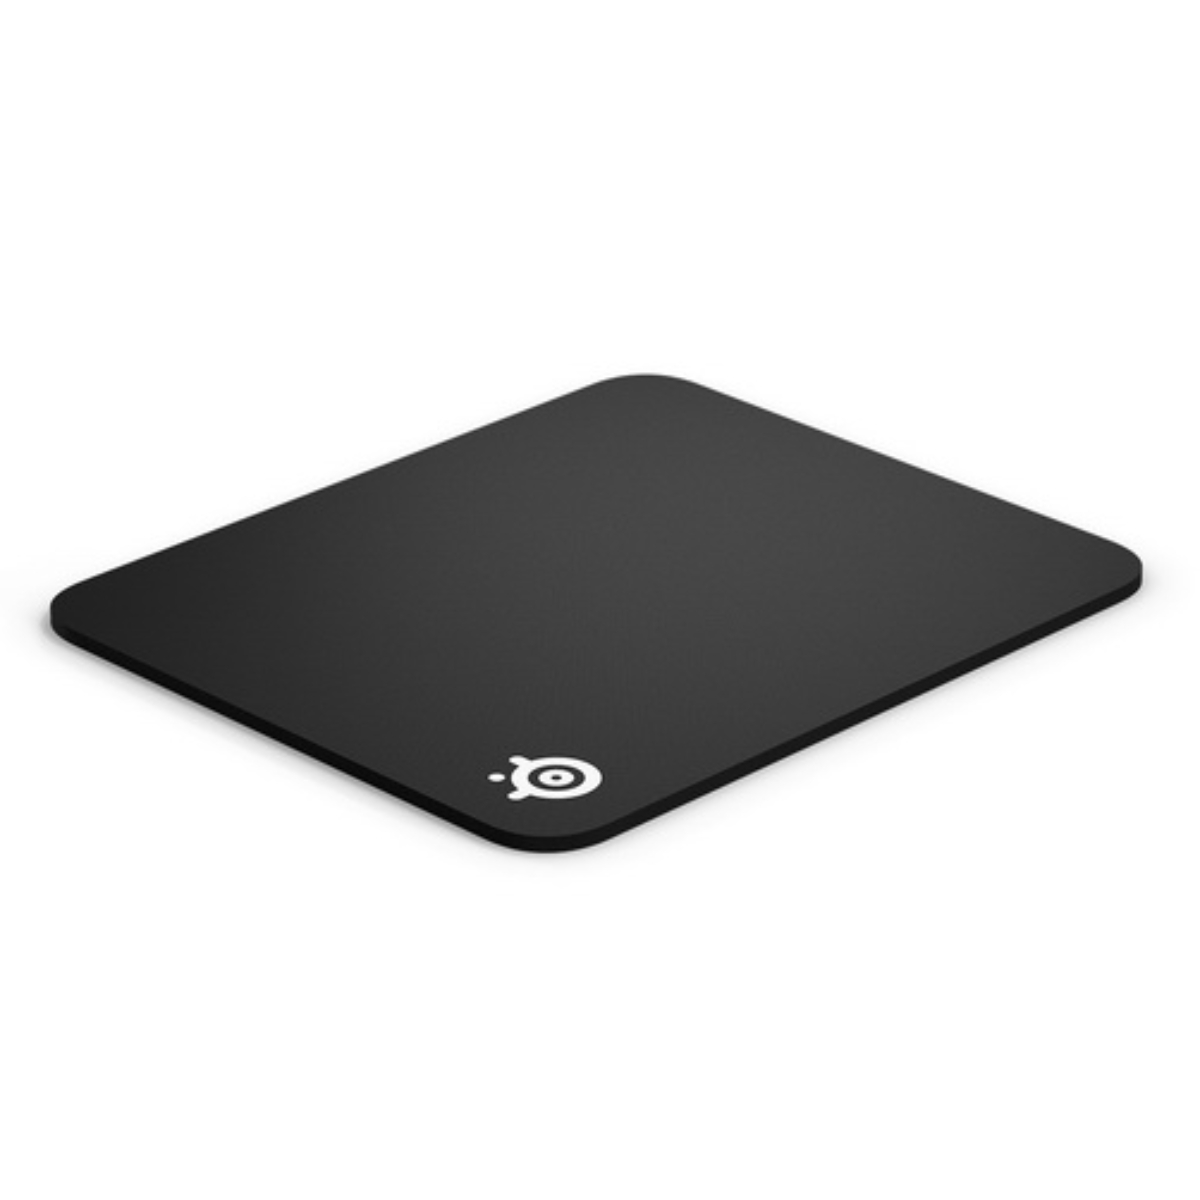 Steelseries Gaming Mouse Pad (Black) QCK HEAVY M-BLK